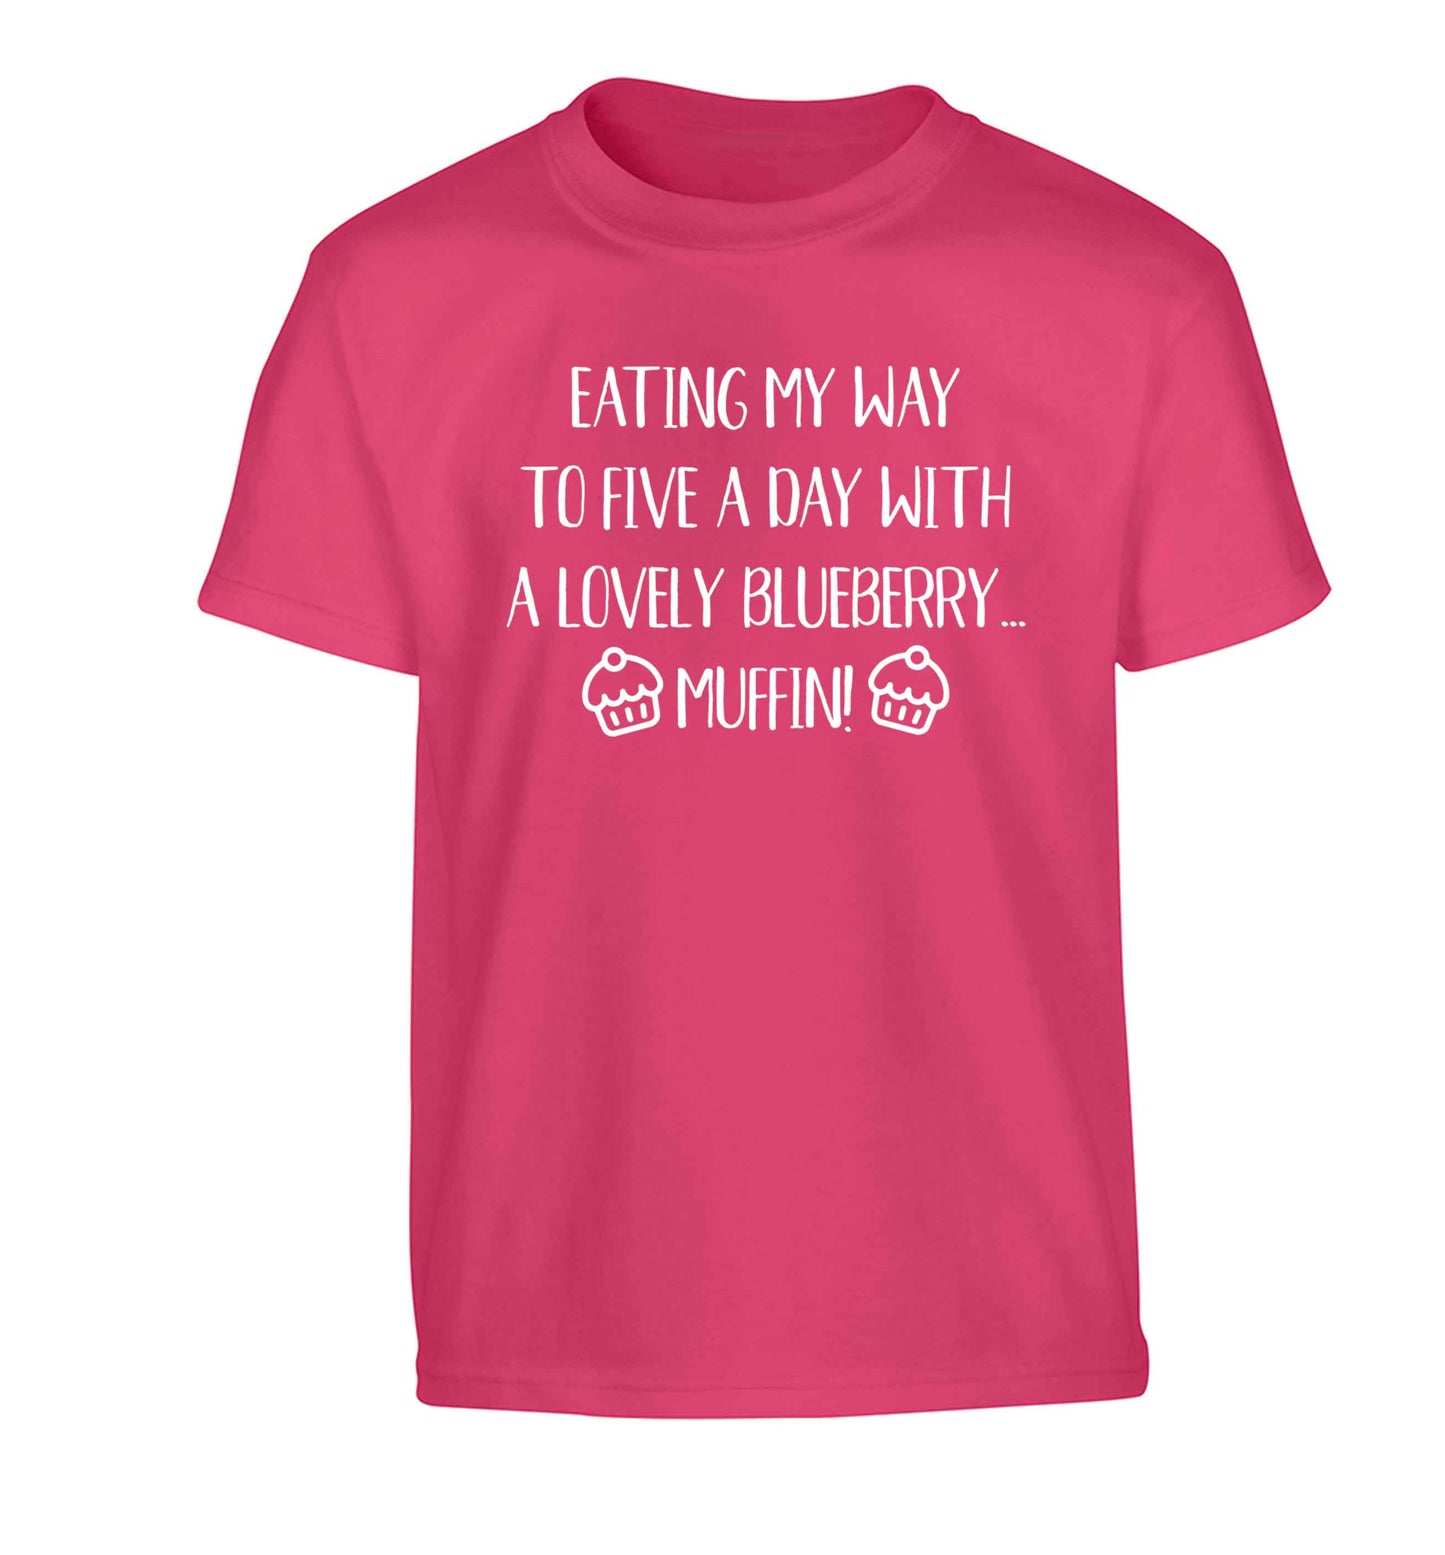 Eating my way to five a day with a lovely blueberry muffin Children's pink Tshirt 12-13 Years